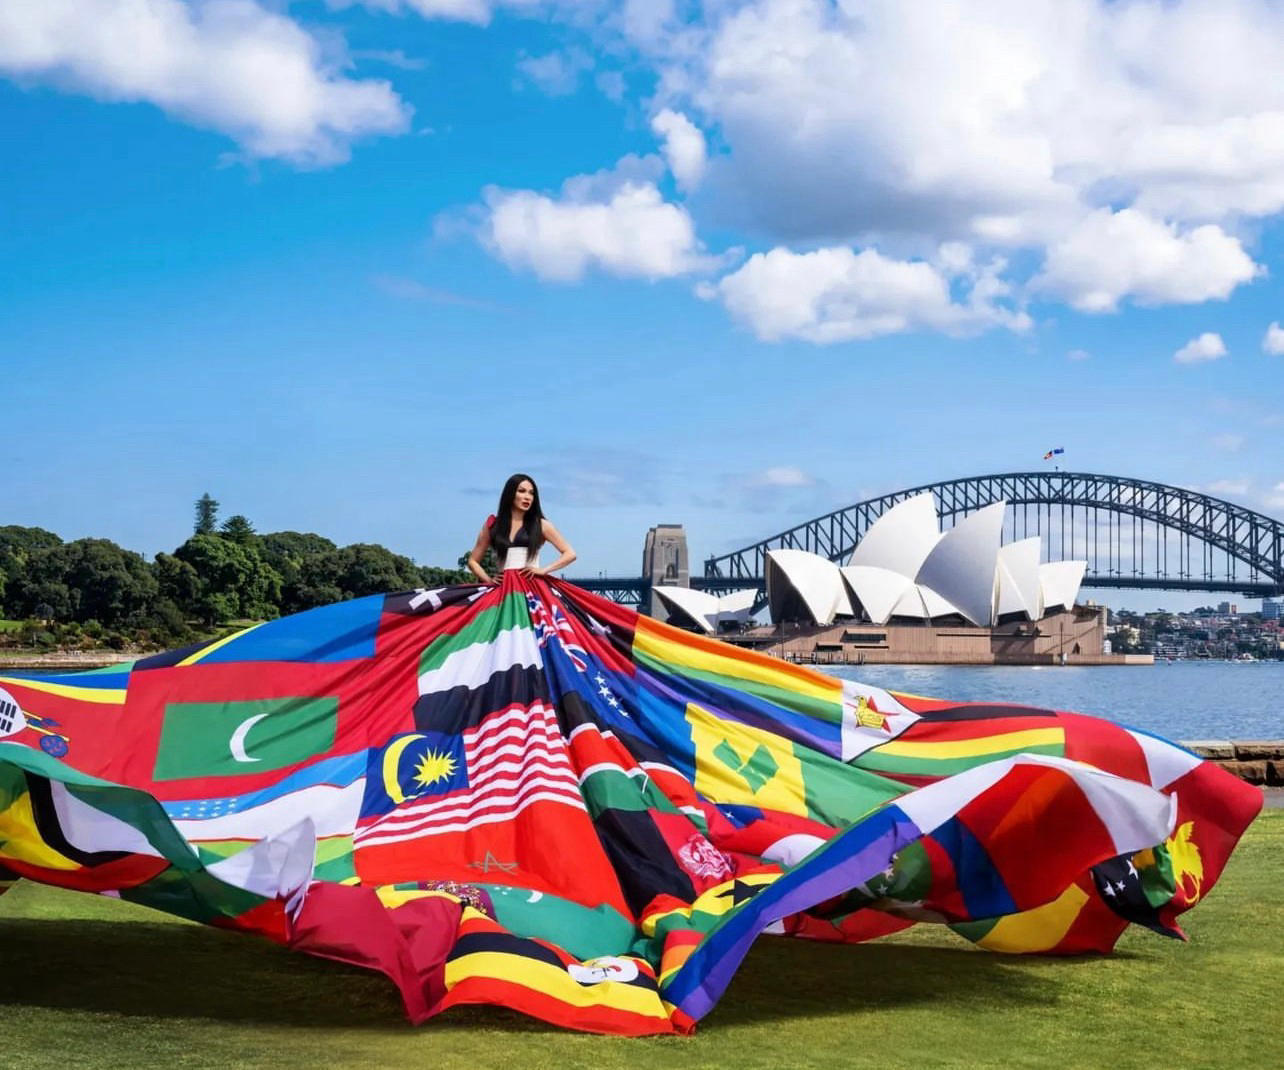 We are excited to welcome the world to Australia to celebrate #SydneyWorldPride